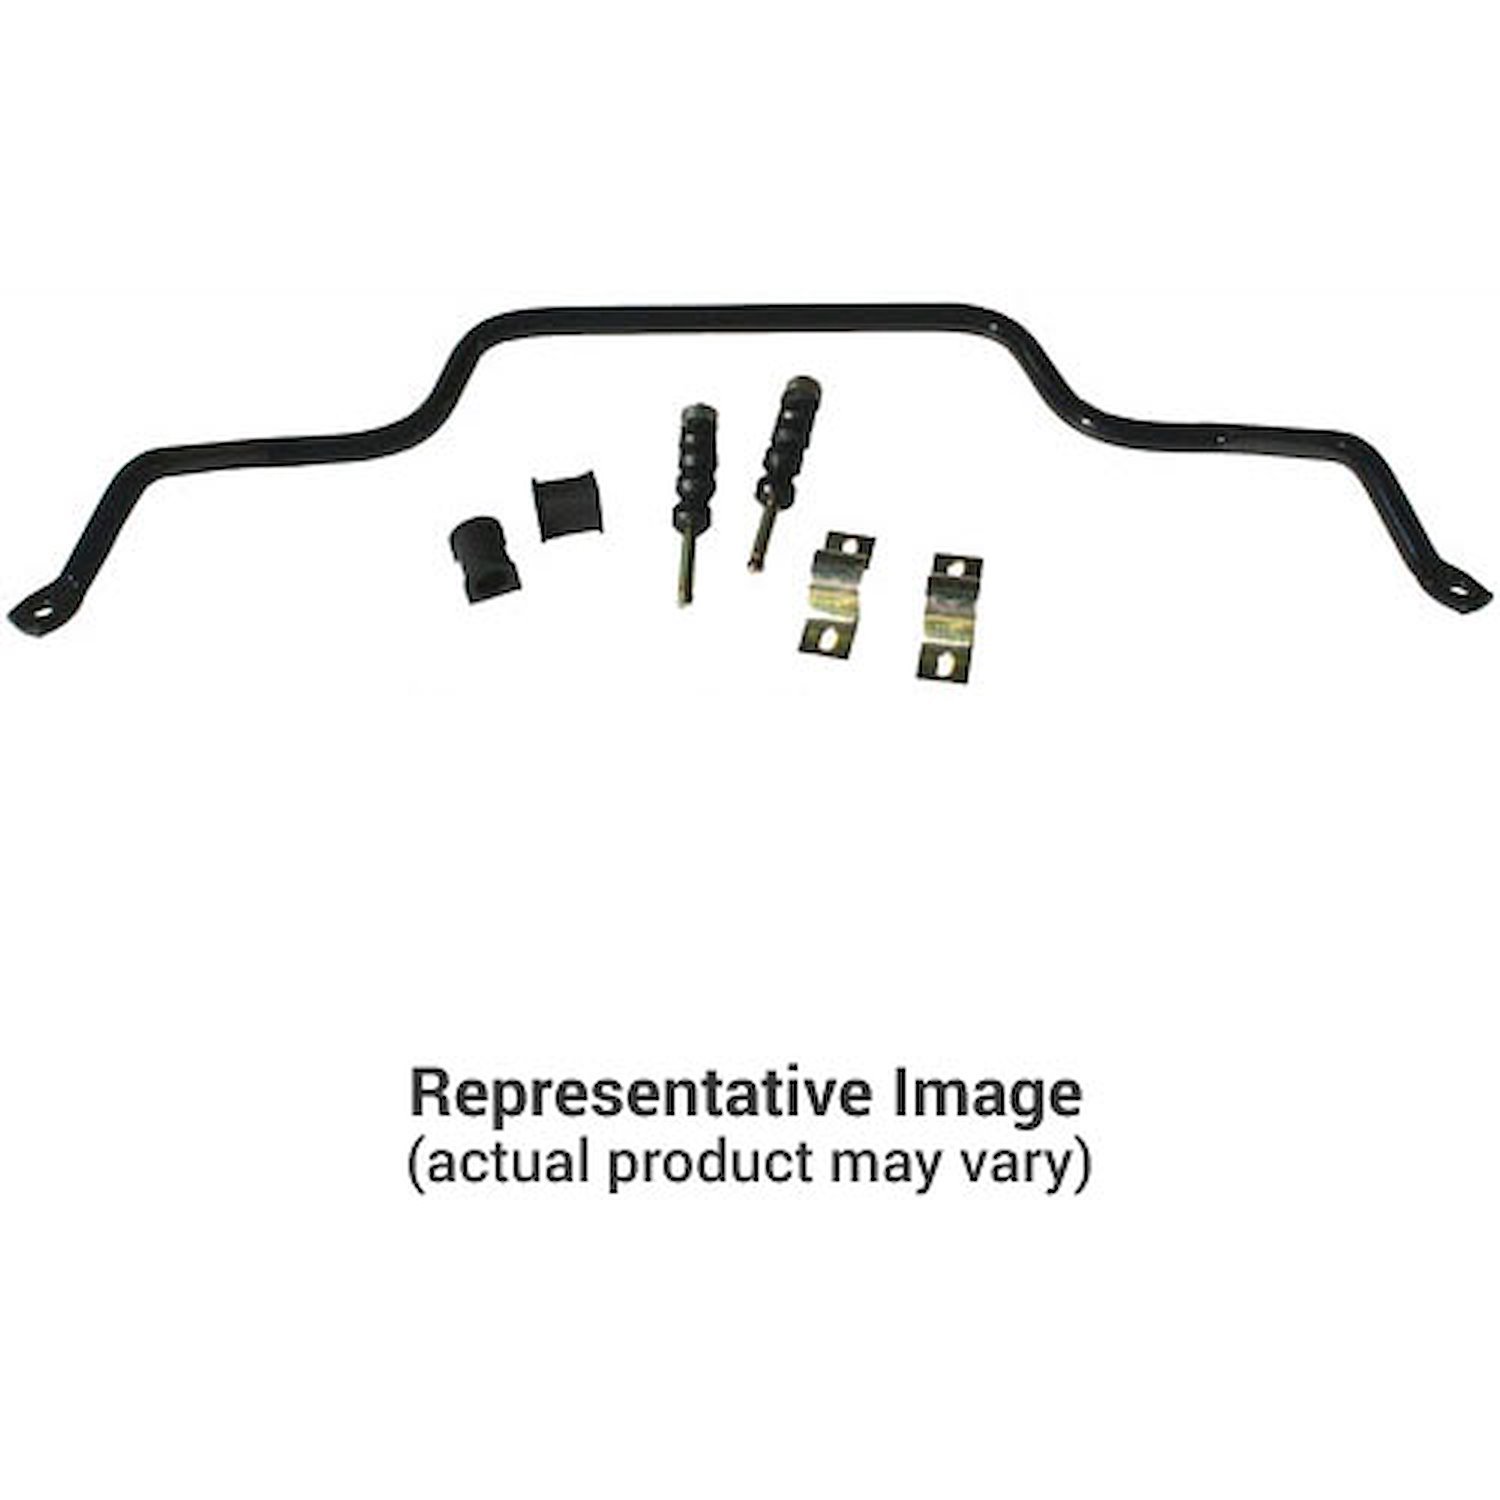 1 1/8" Front Sway Bar 1980-91 Ford F-150 2WD